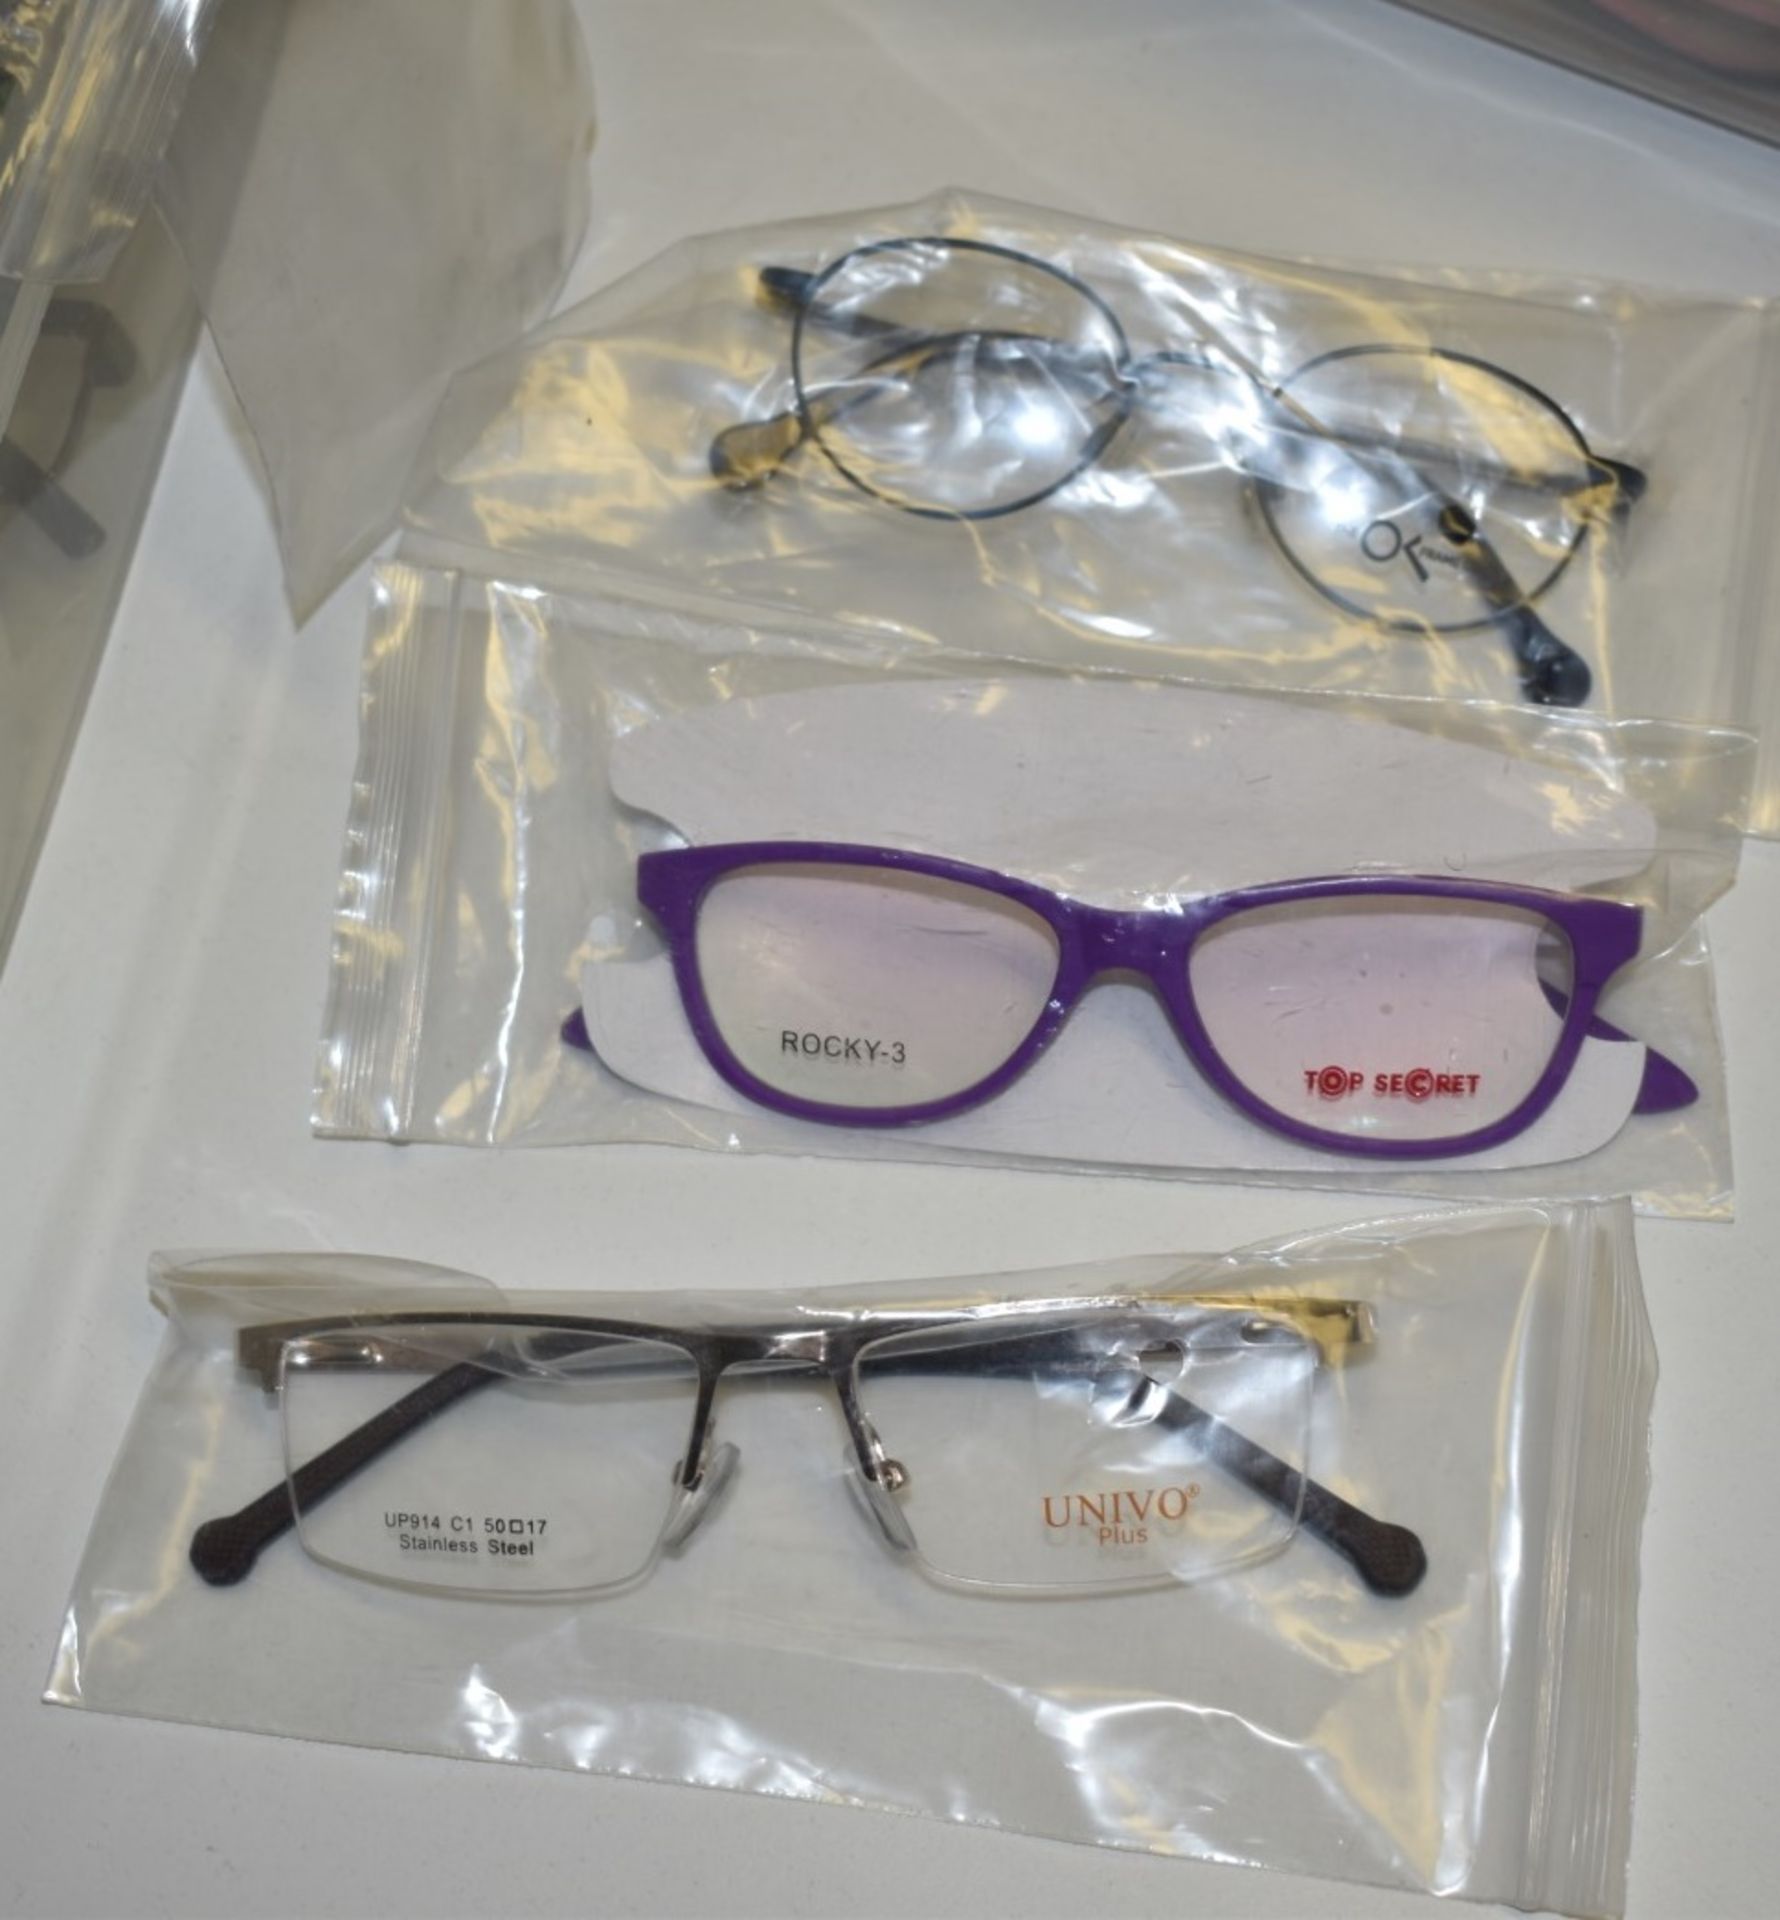 100 x Assorted Pairs of Spectacle Eye Glasses - New and Unused Stock - Various Designs and Brands - Image 12 of 19